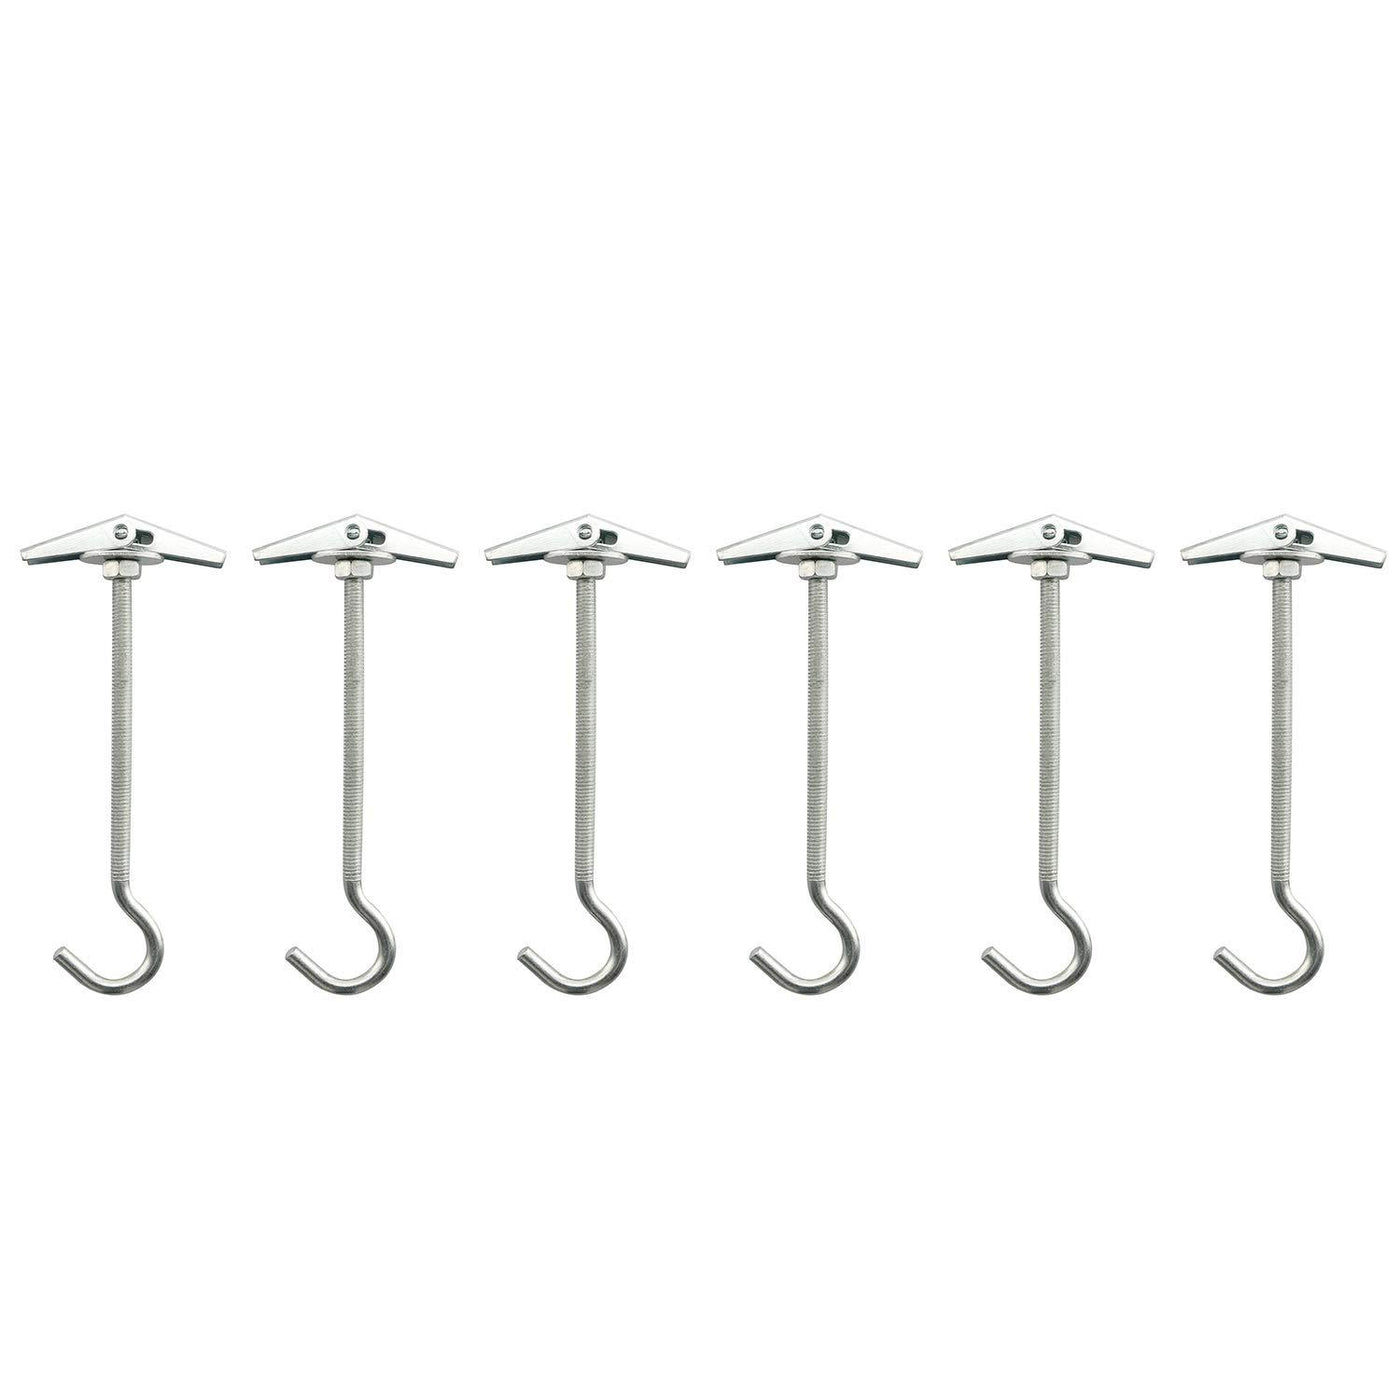 IDEALSV Screw Ceiling Hooks Stainless Steel 7/8 inch Cup Hook Screw-In Light Hooks Outdoor and Indoor Hanging (40 Pcs)